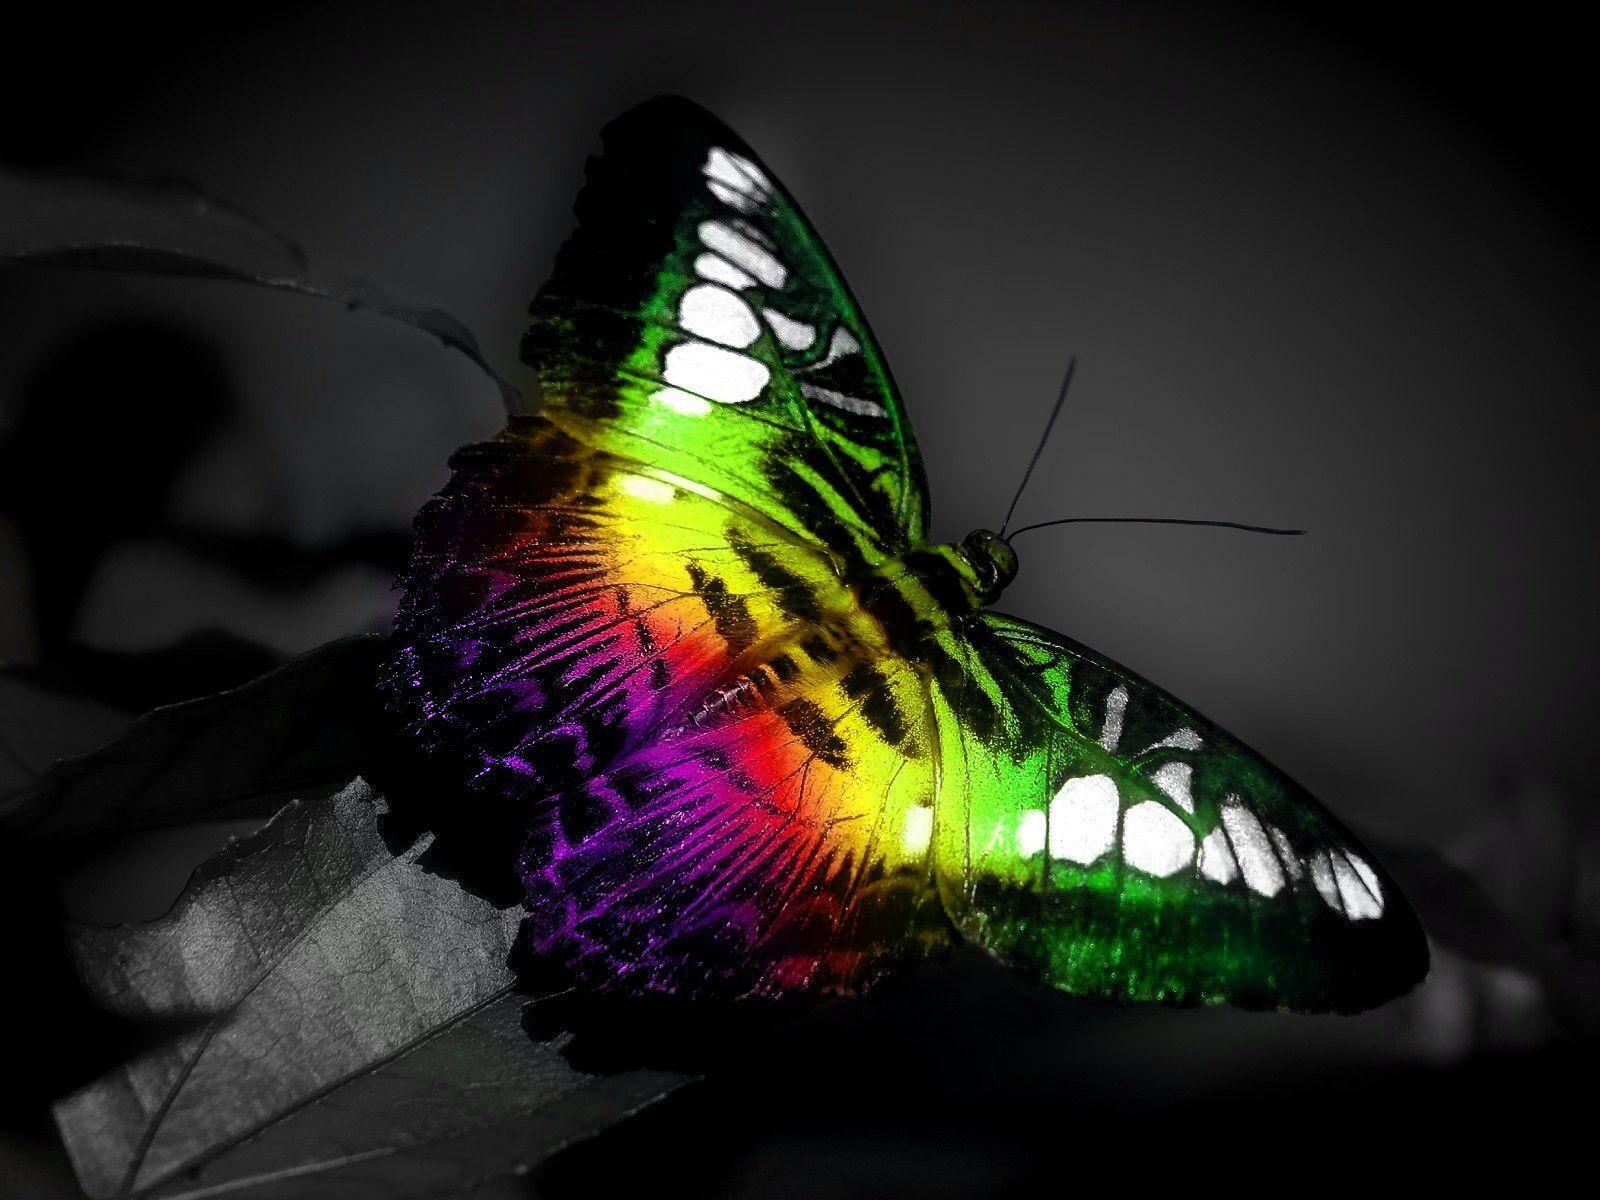 Butterfly Wallpaper Share Android Apps on Google Play. HD